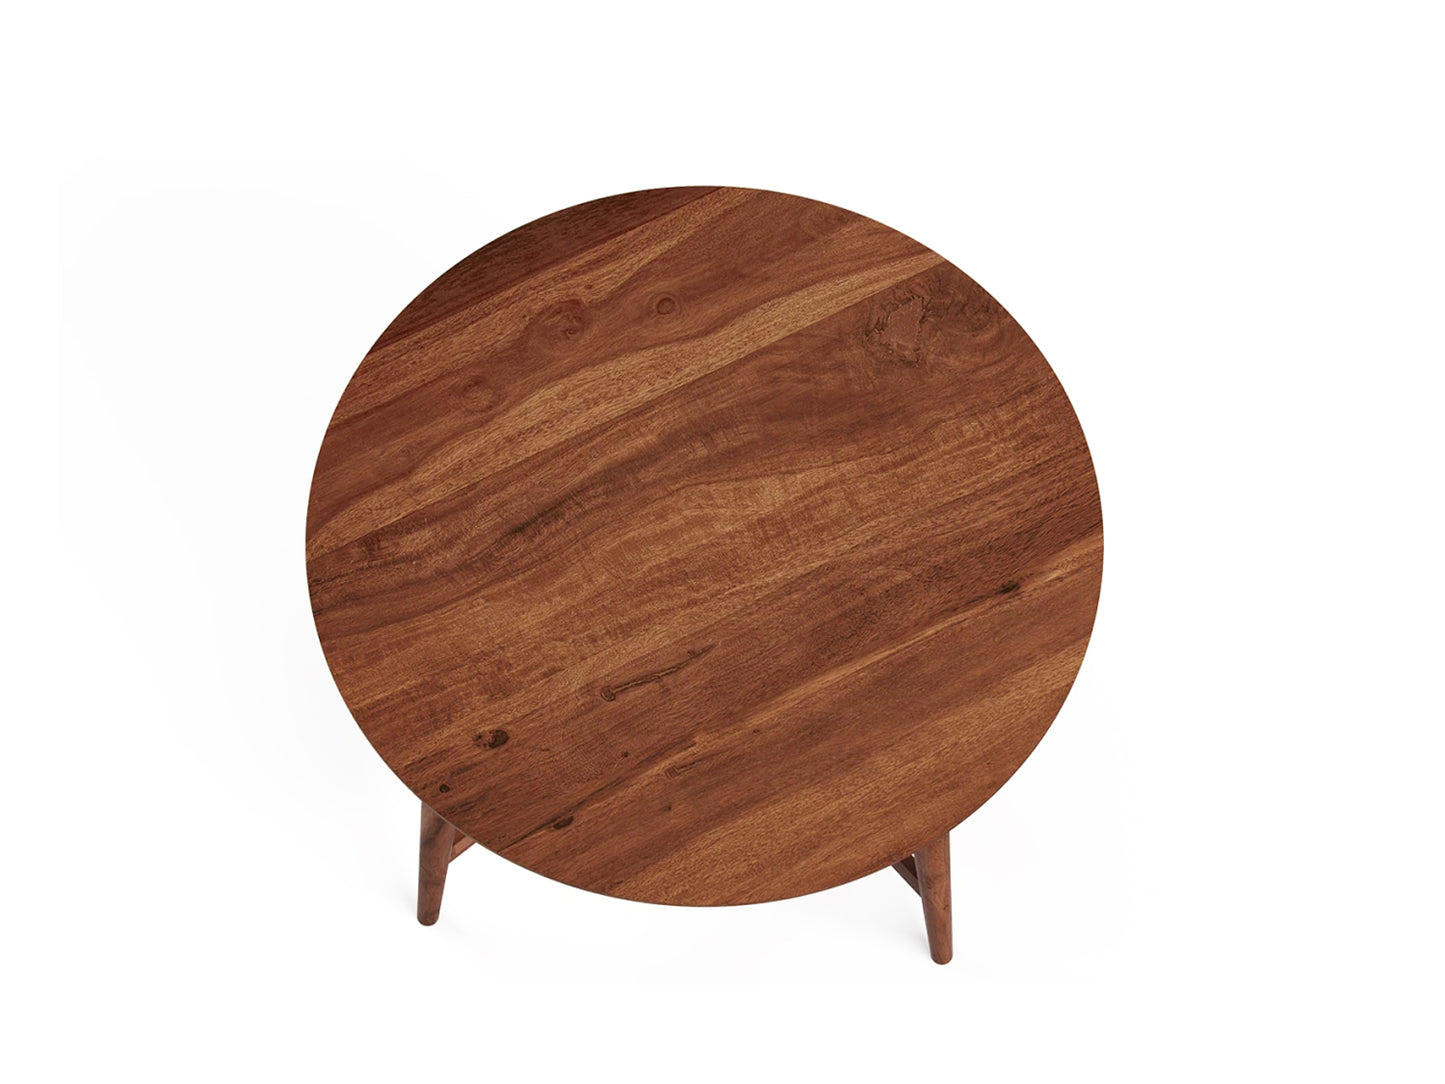 Top-down acacia wood coffee table with white background